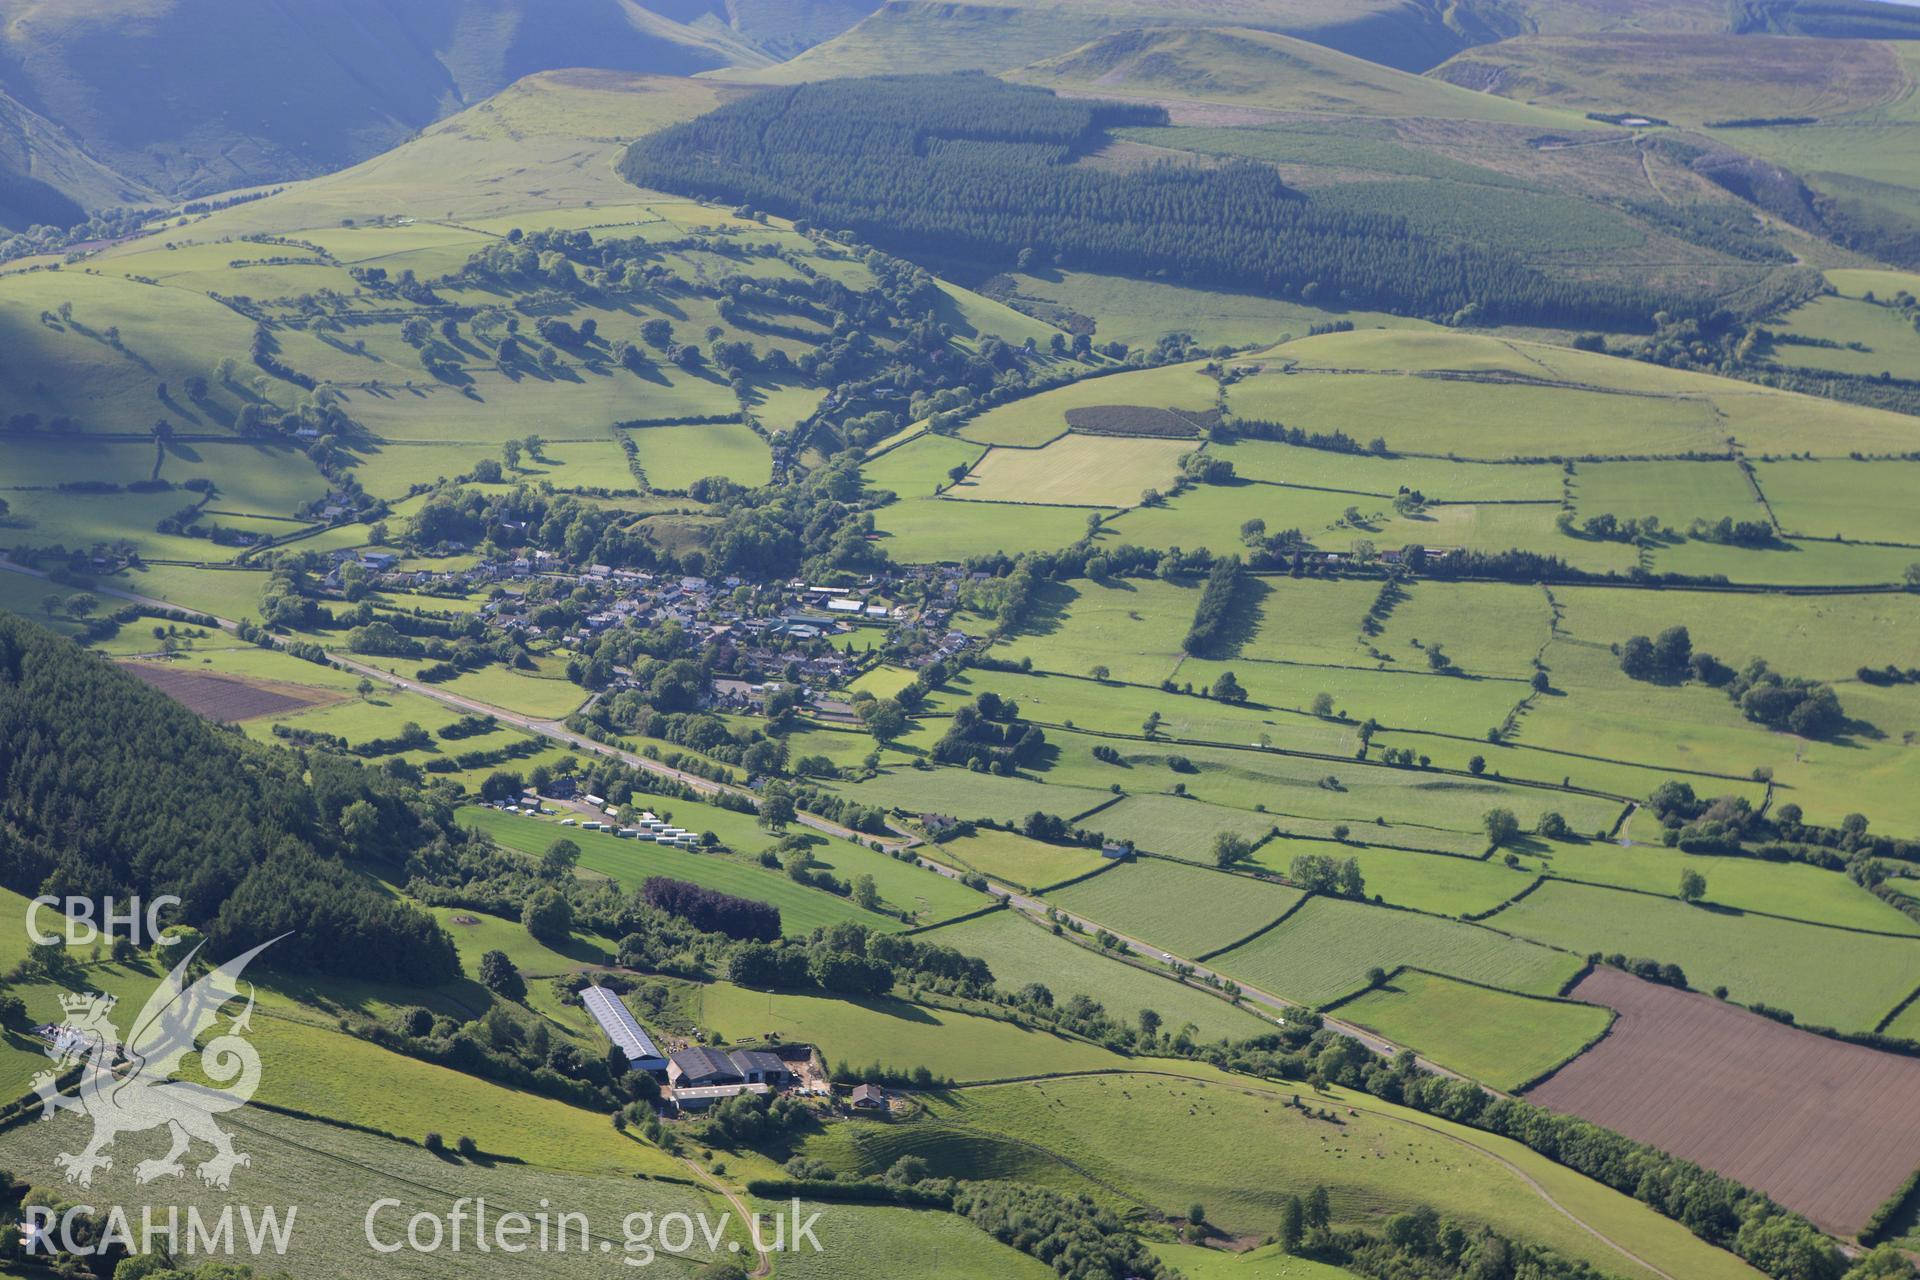 RCAHMW colour oblique aerial photograph of New Radnor, viewed from the south. Taken on 11 June 2009 by Toby Driver